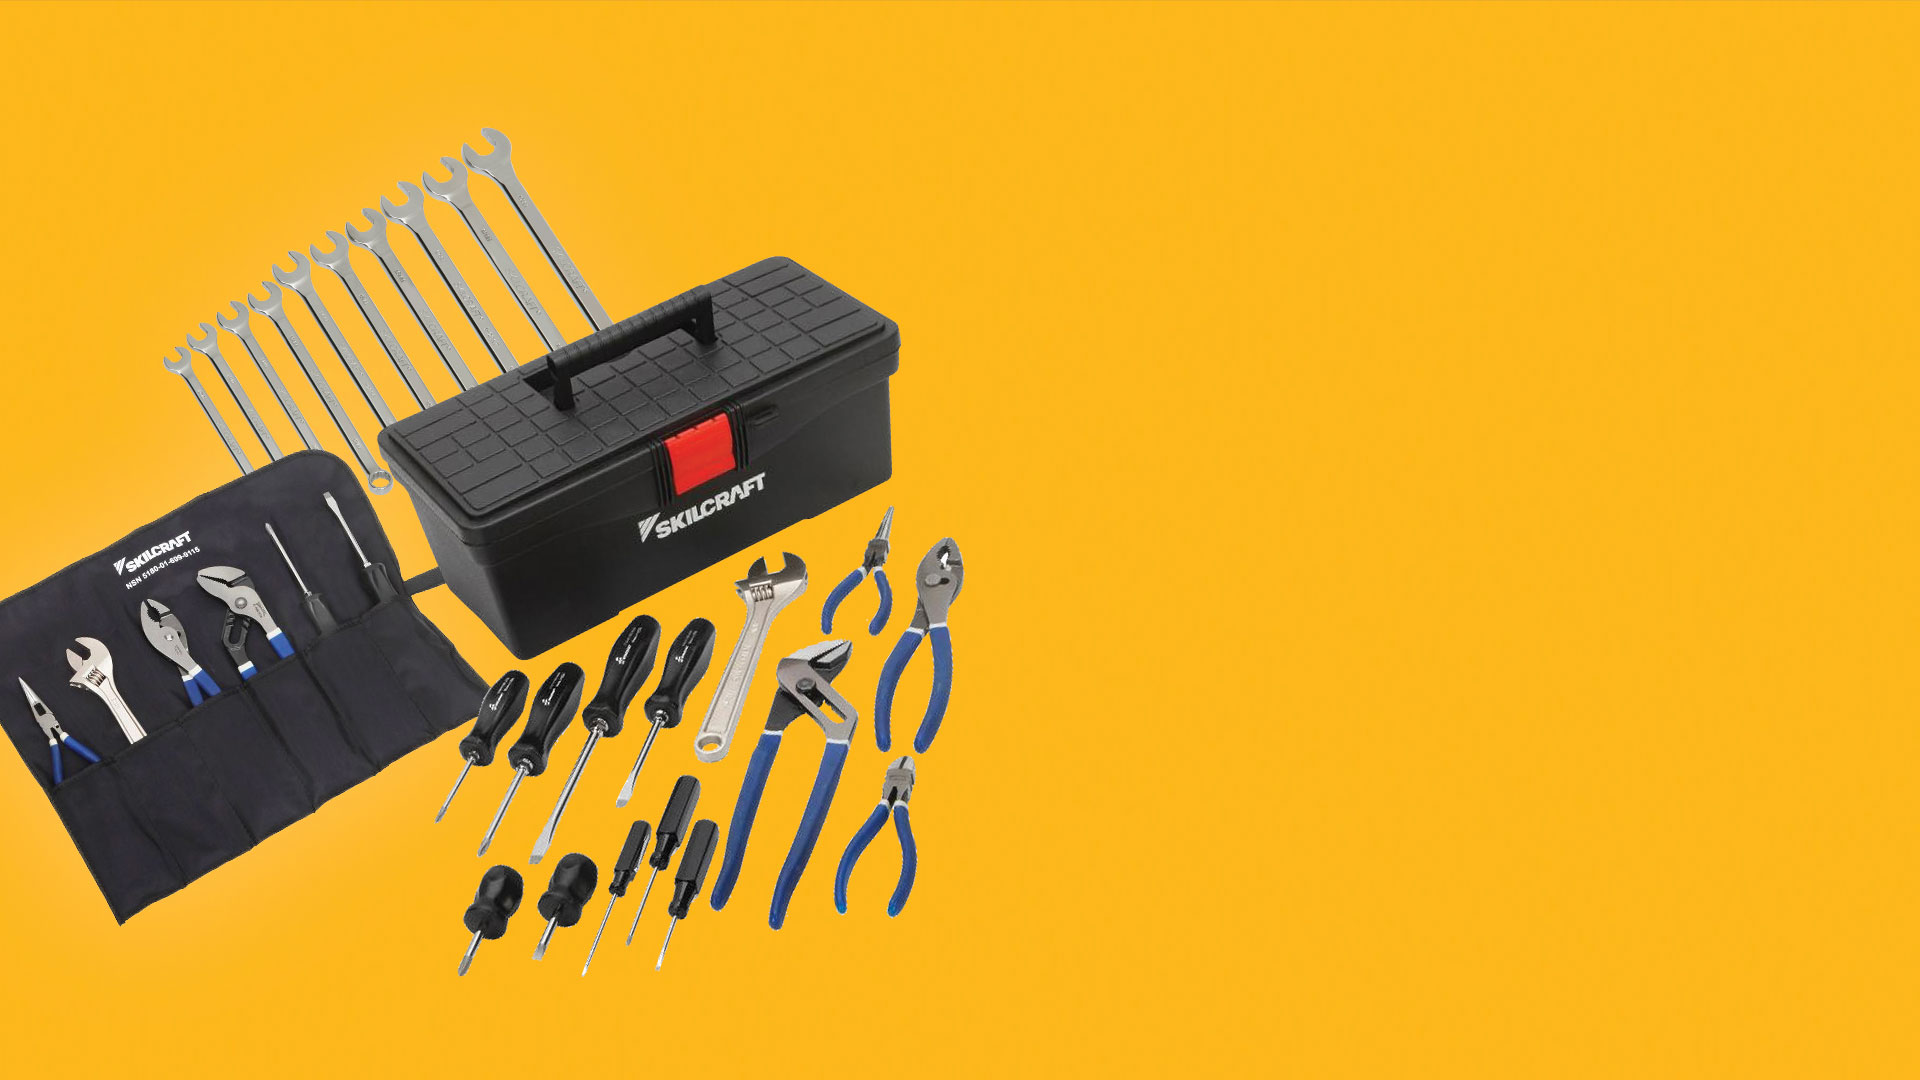 multiple sets of screw drivers, pliers, and wrenches next to a tool box and tool sleeve.